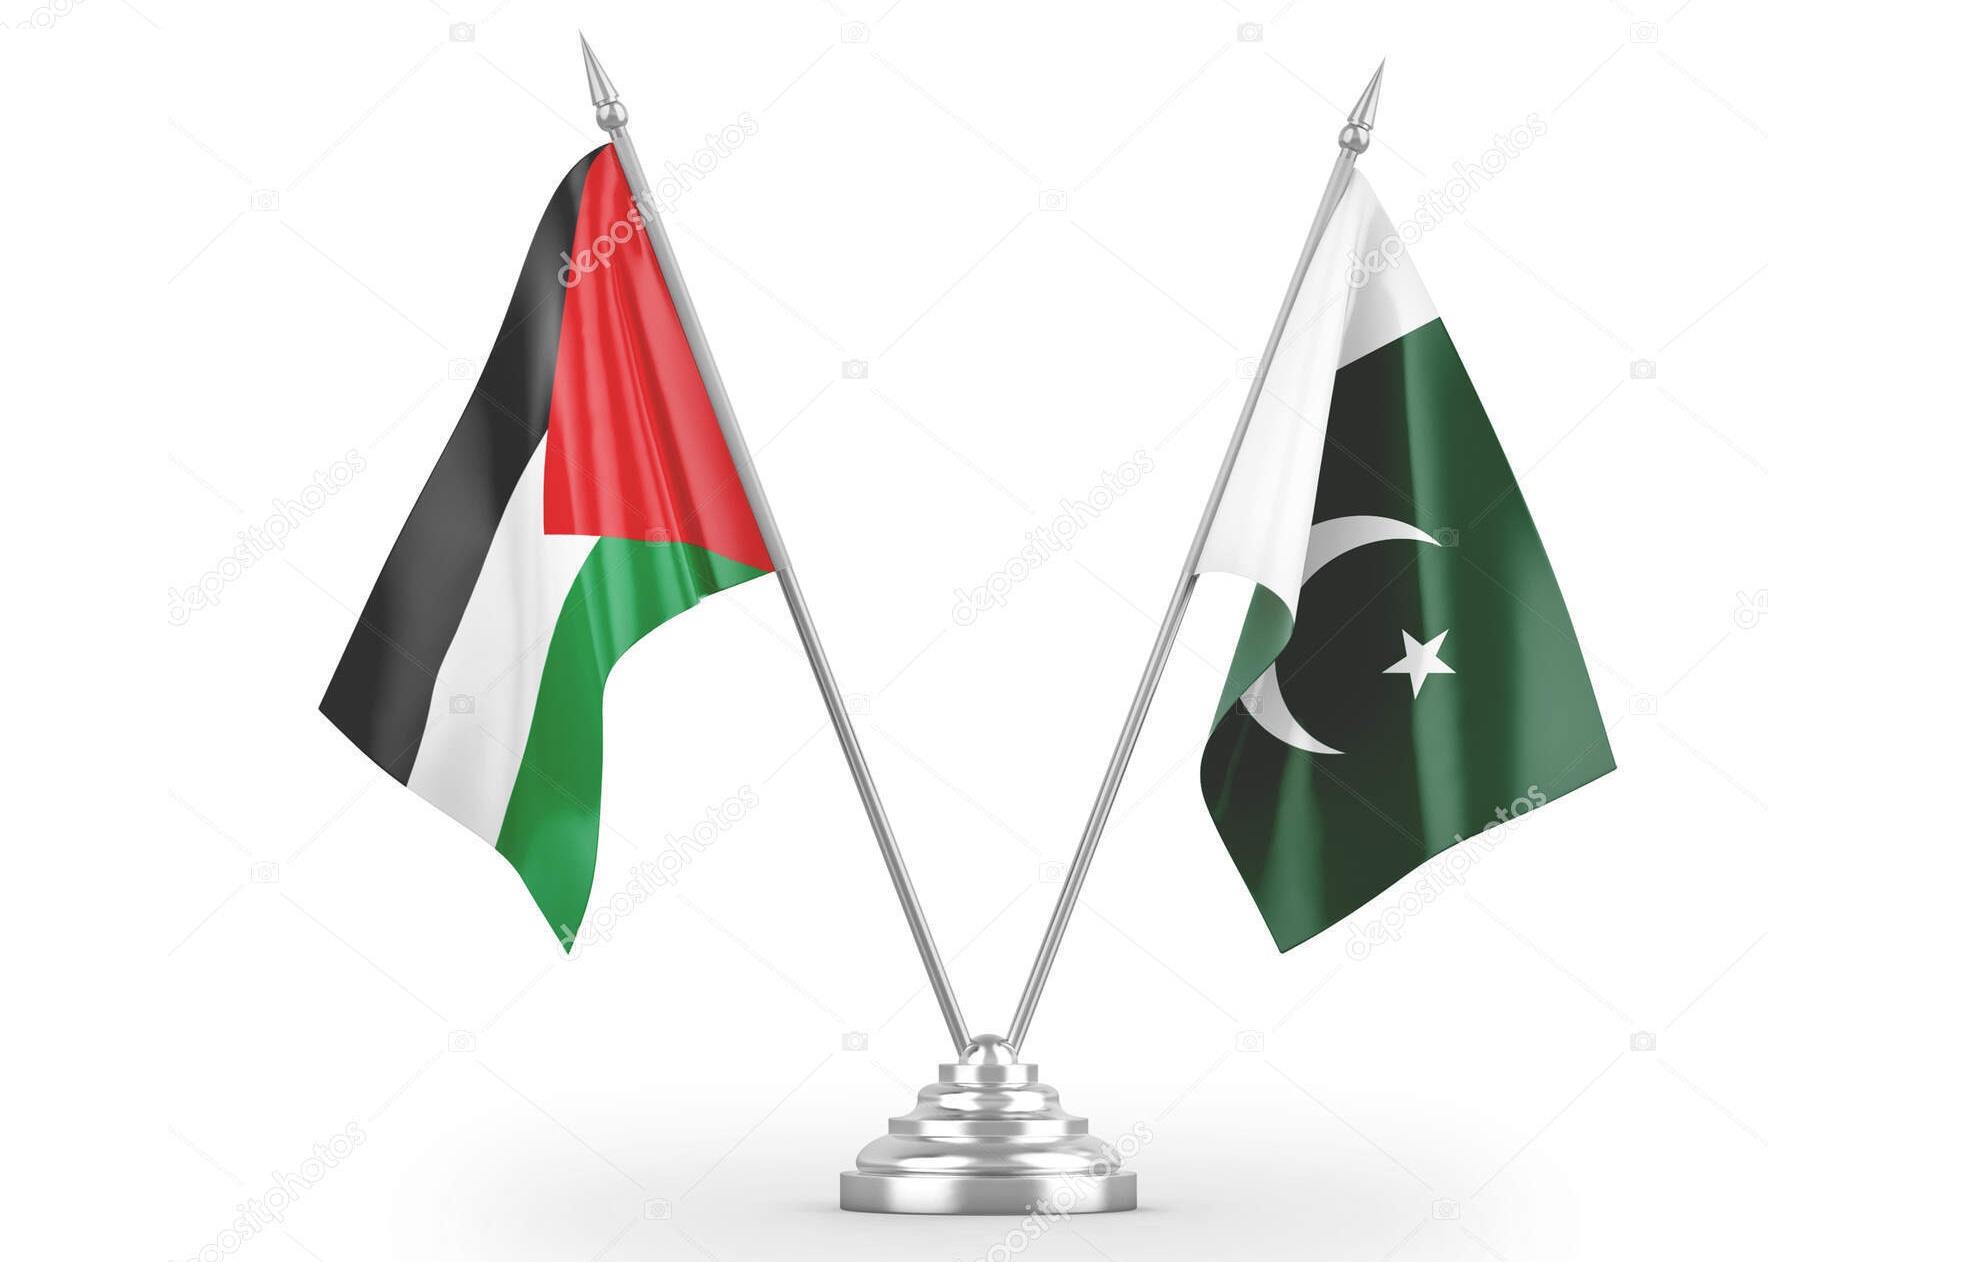 Pakistan’s position regarding Palestinian issue has not changed, says spokesperson